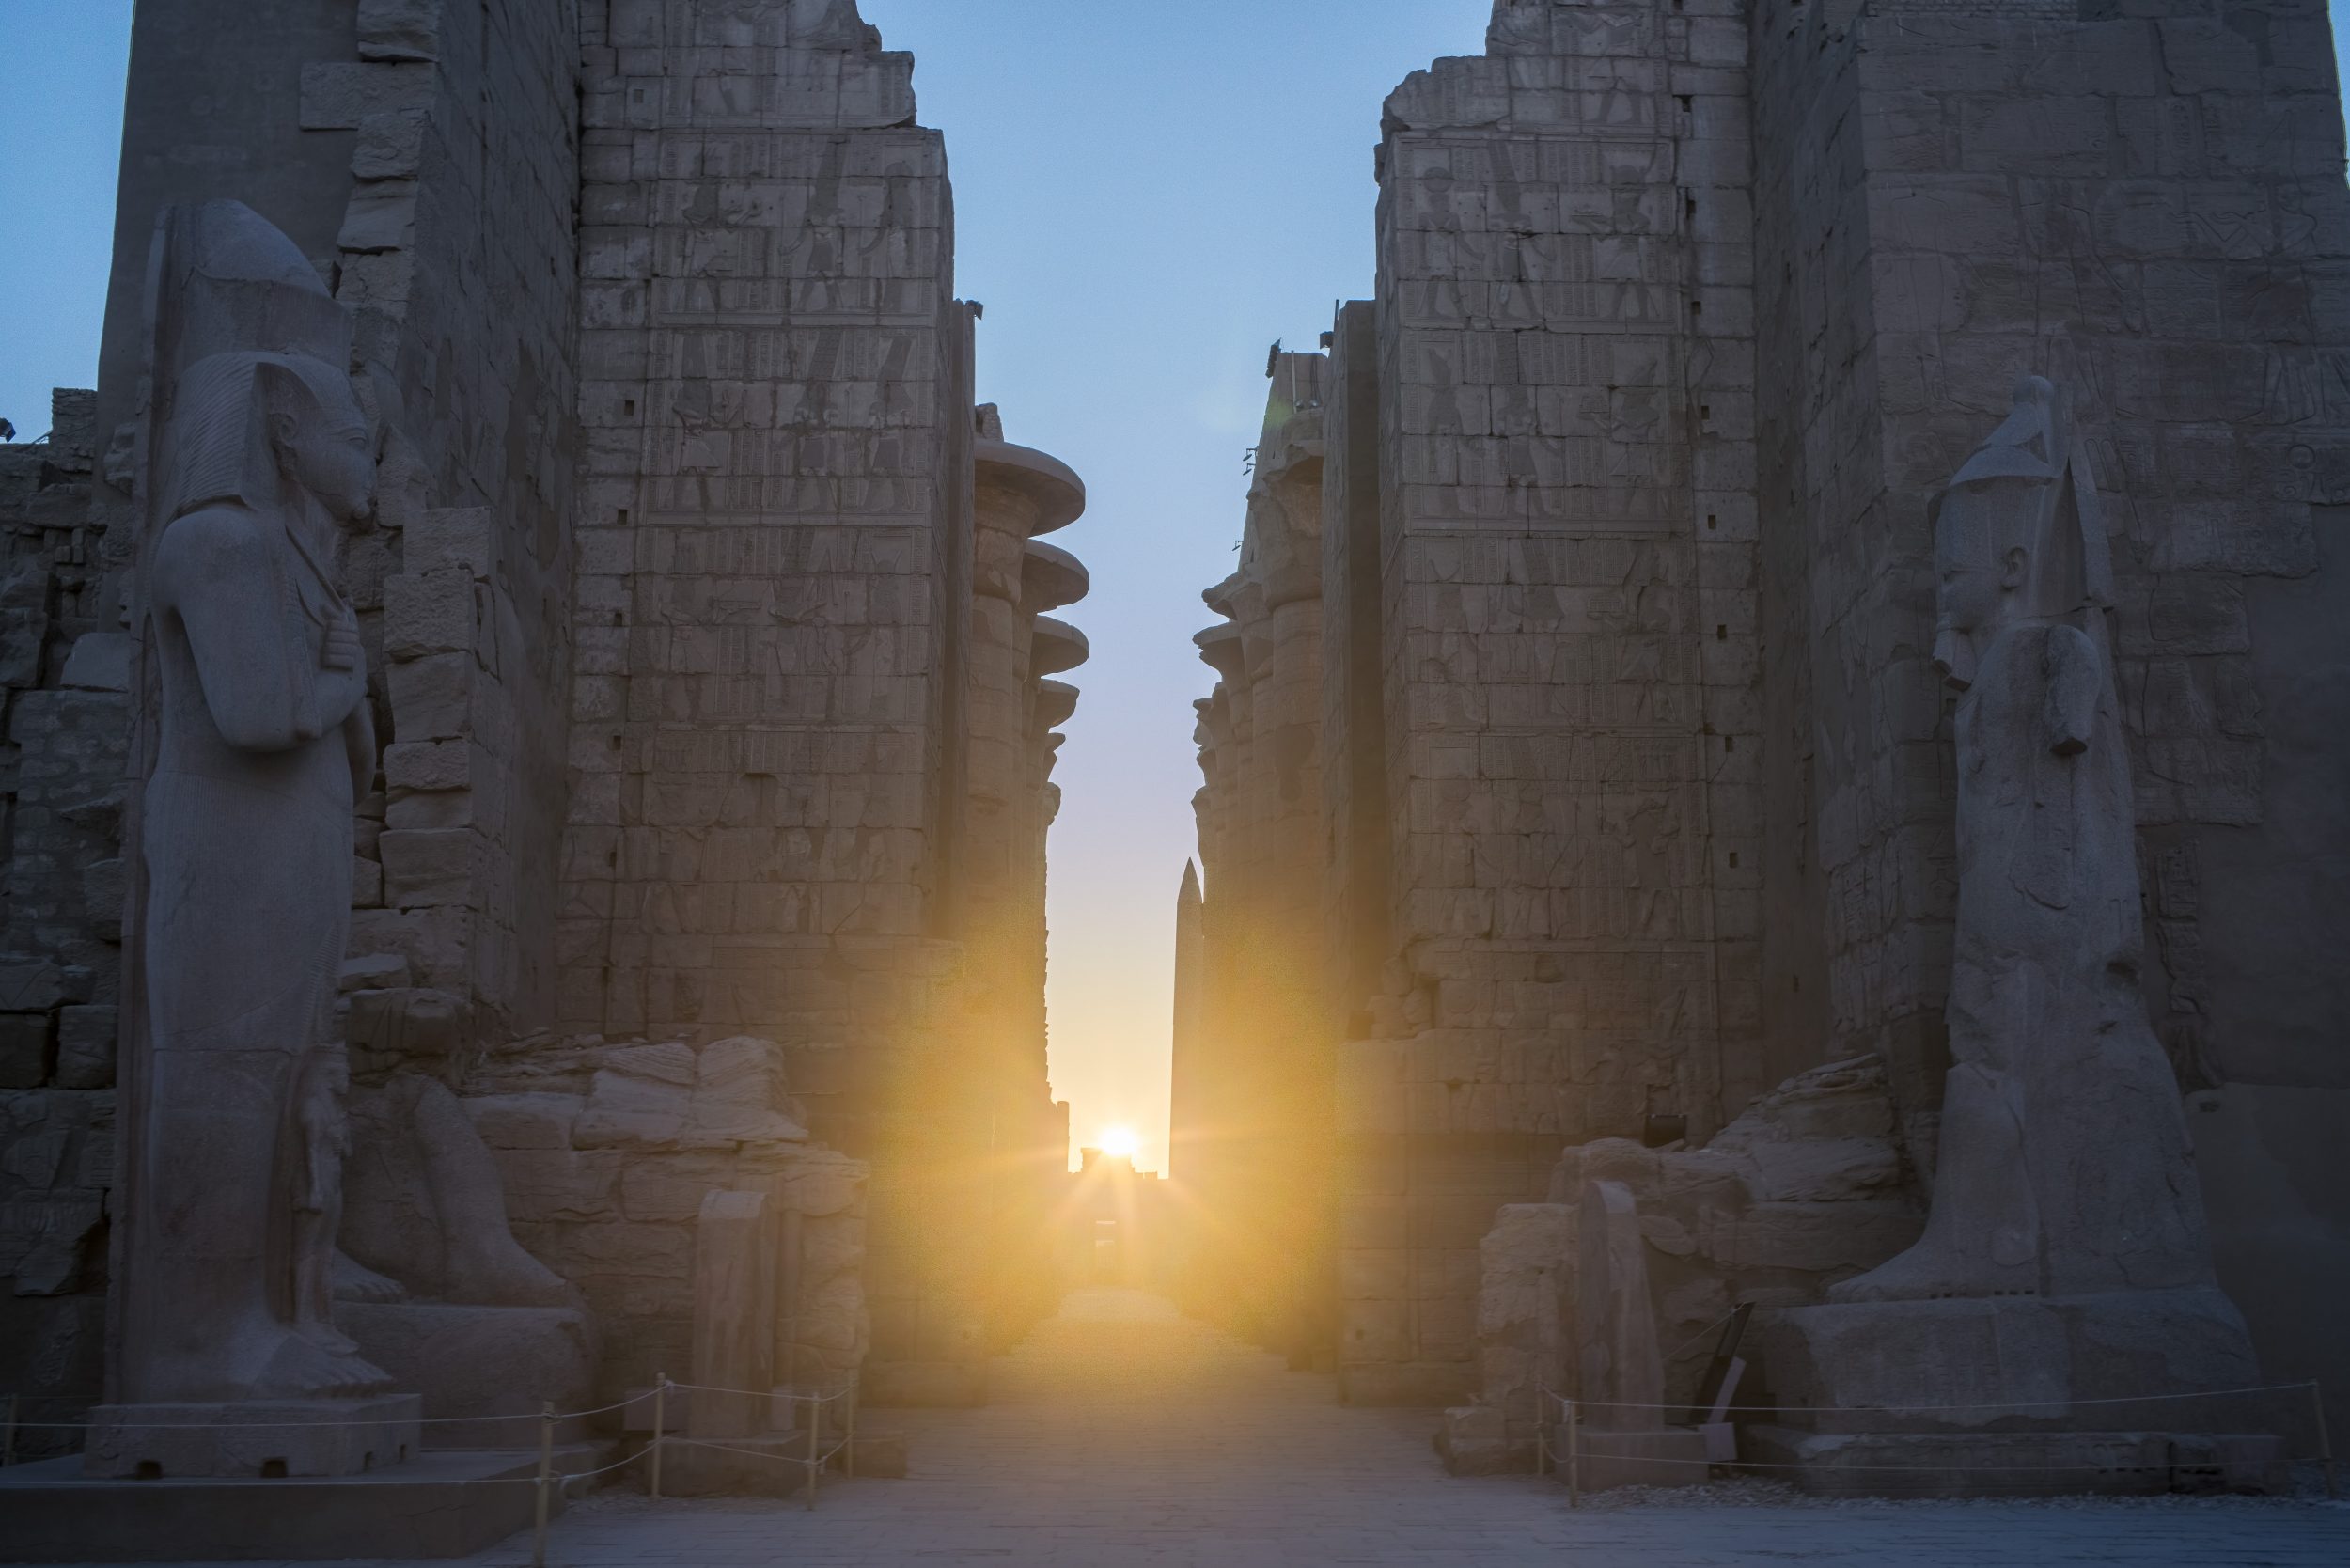 Karnak Temple in Luxor, Egypt was designed to align with the sunrise on the solstice, focusing light on a shrine to the sun god. Ancient Egypt's sprawling temple of Karnak was constructed in alignment with the winter solstice at Luxor more than 4,000 years ago. 